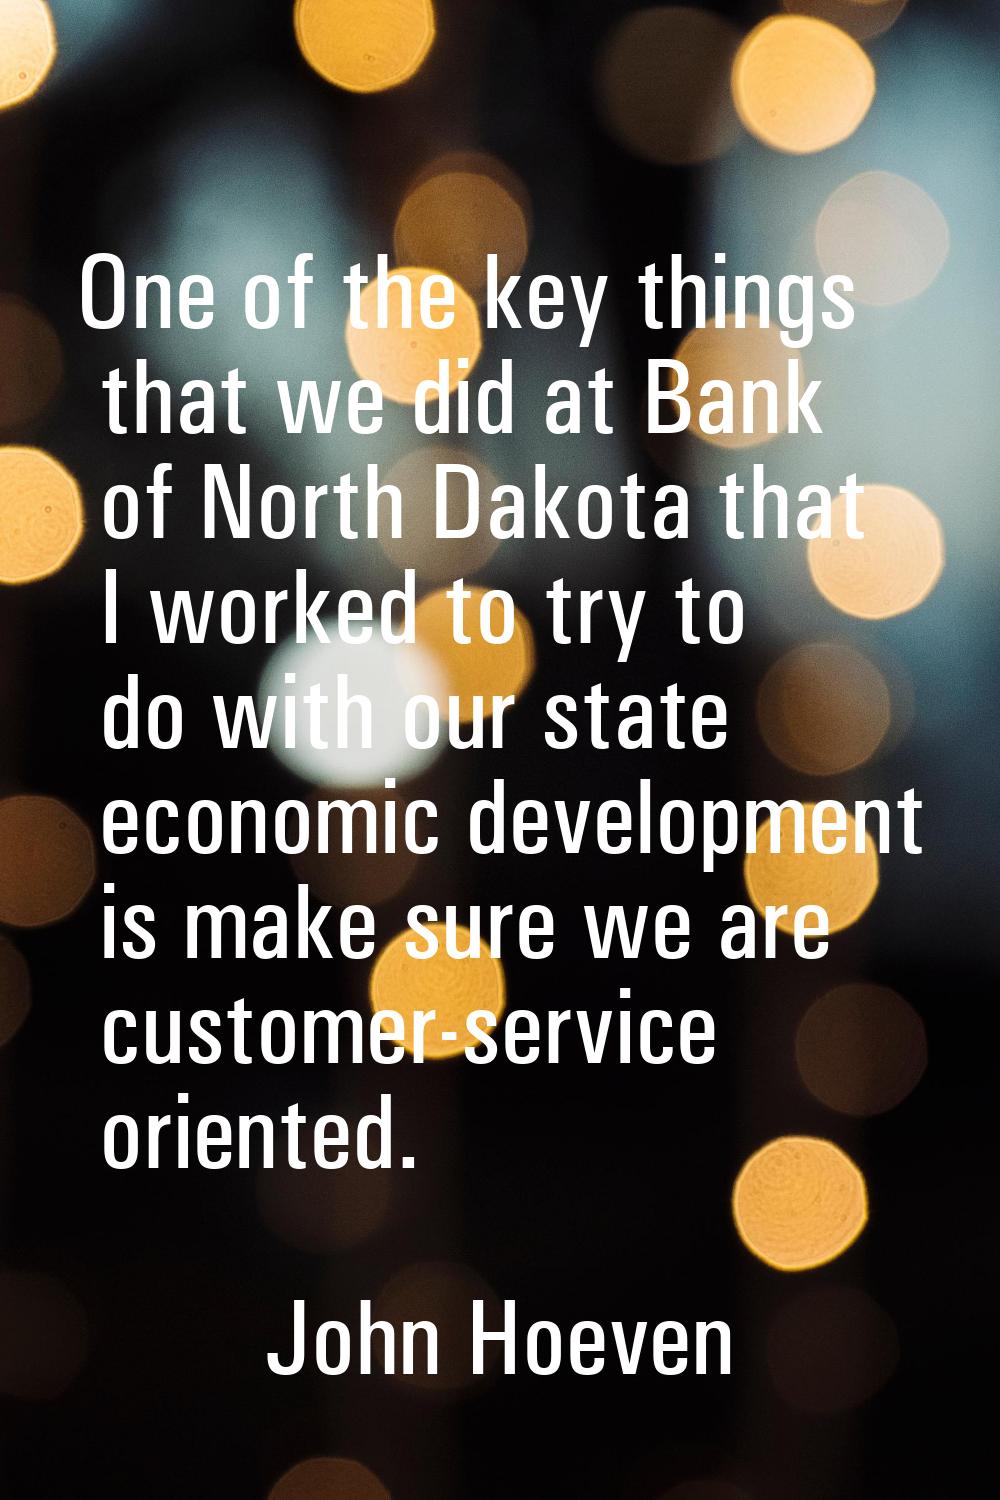 One of the key things that we did at Bank of North Dakota that I worked to try to do with our state